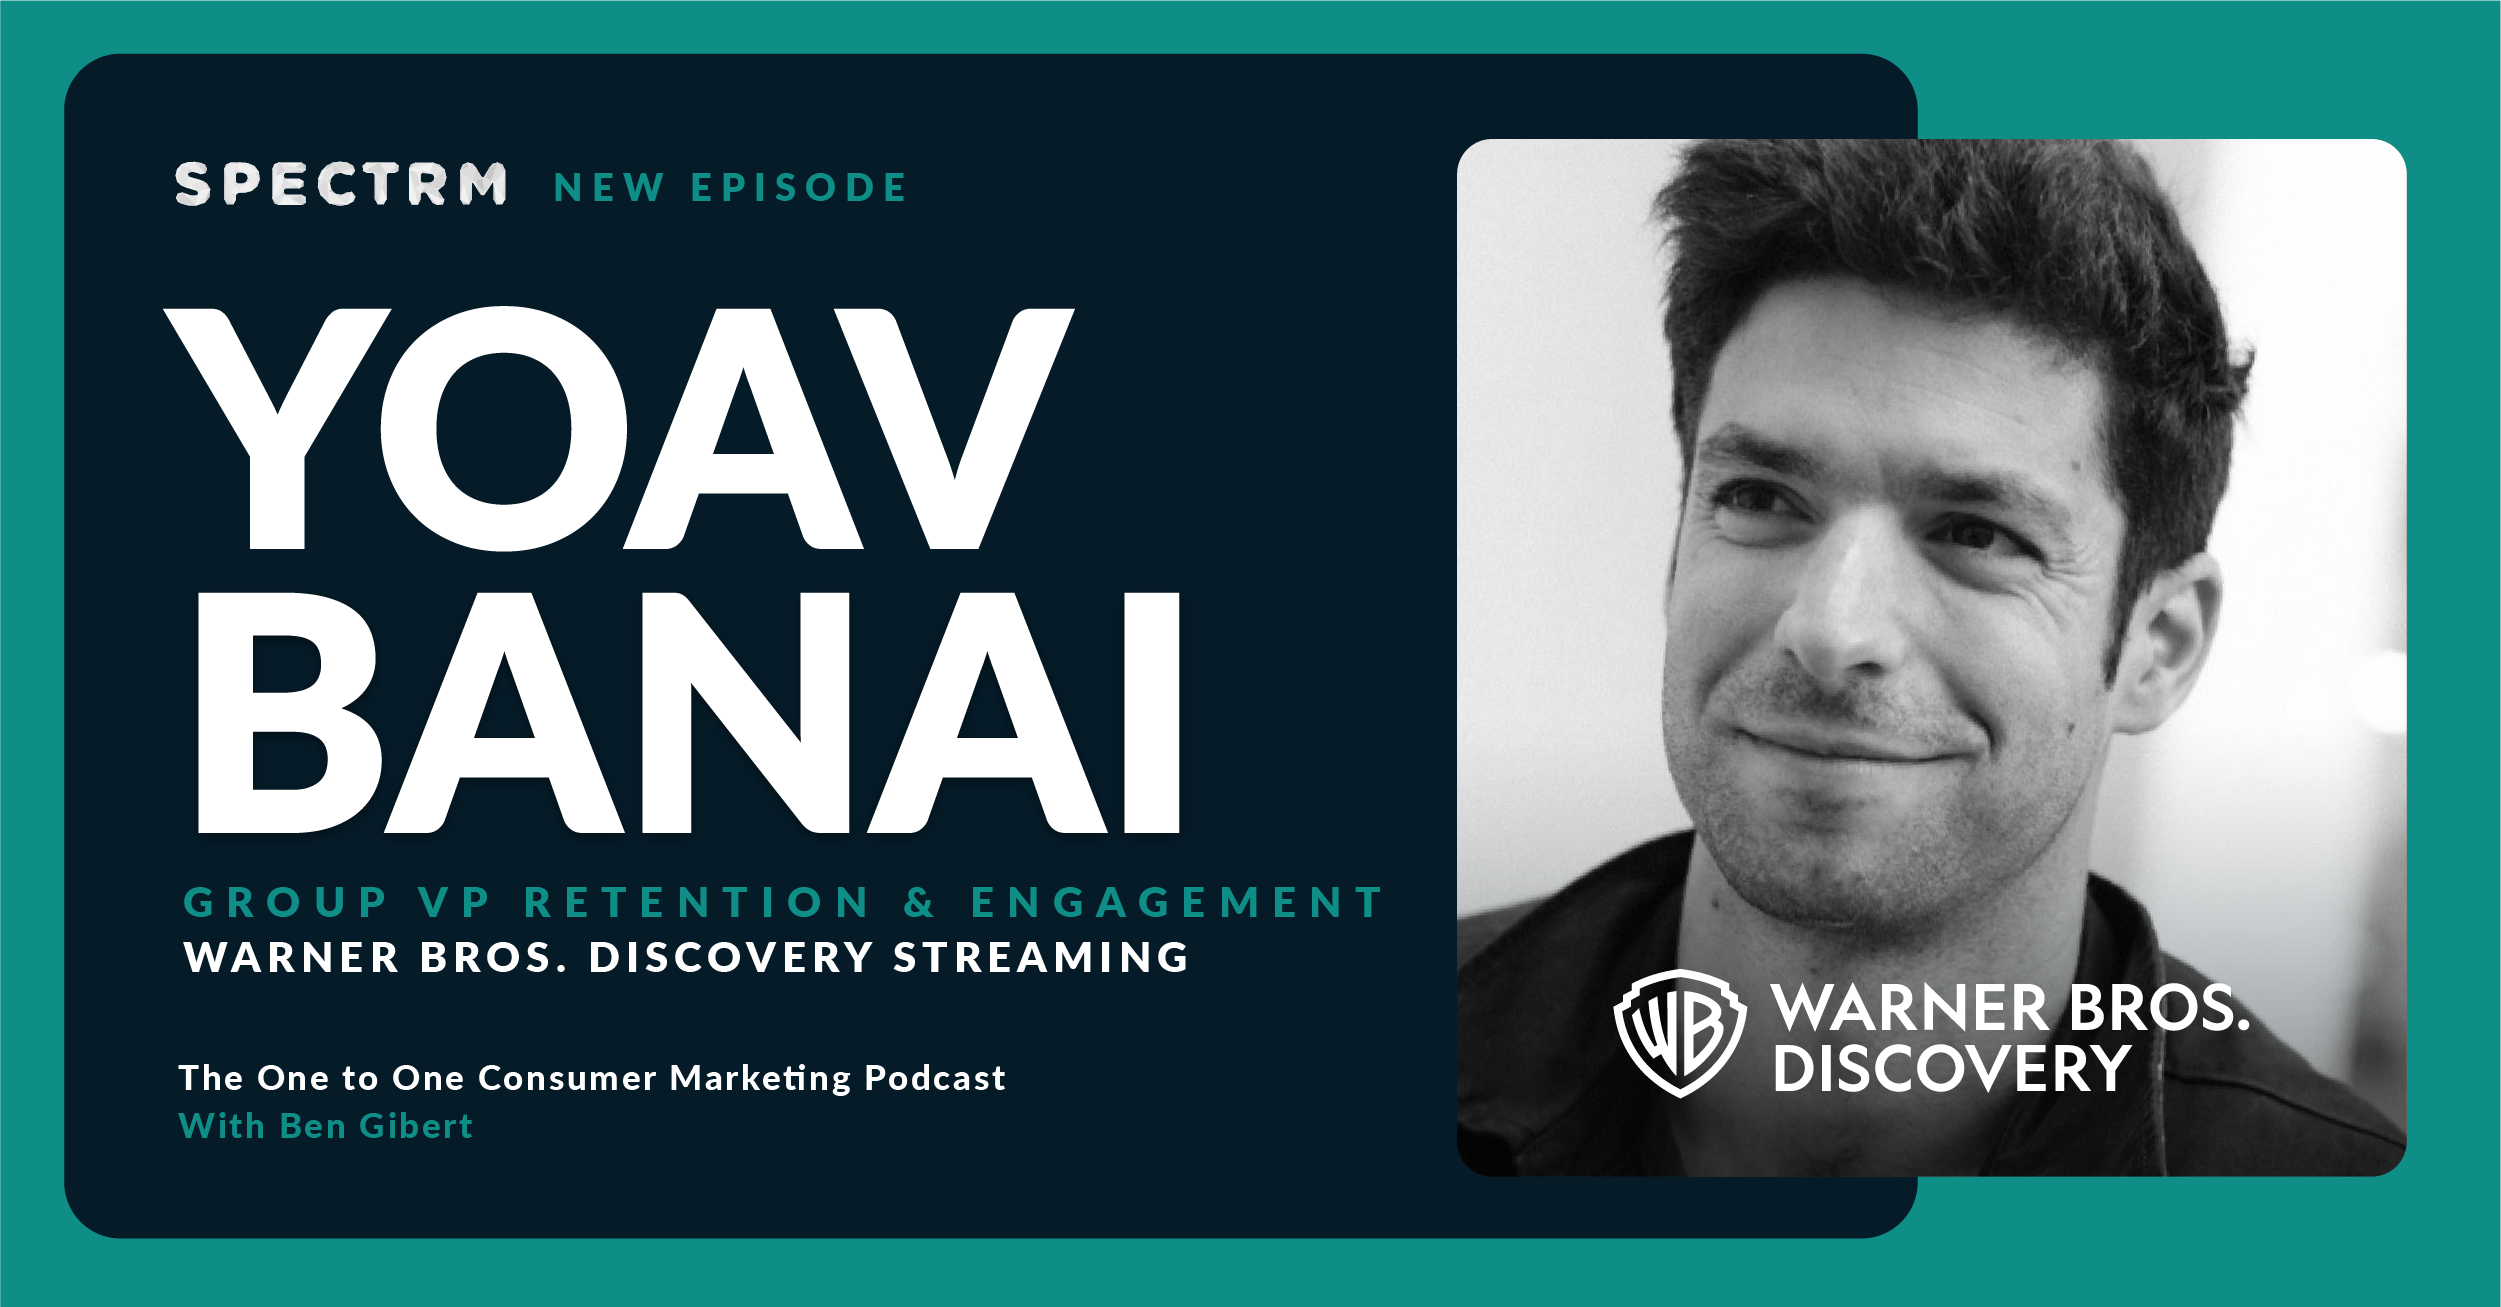 Better Approaches to More Targeted and Personalized Customer Retention with Warner Bros. Discovery's Yoav Banai